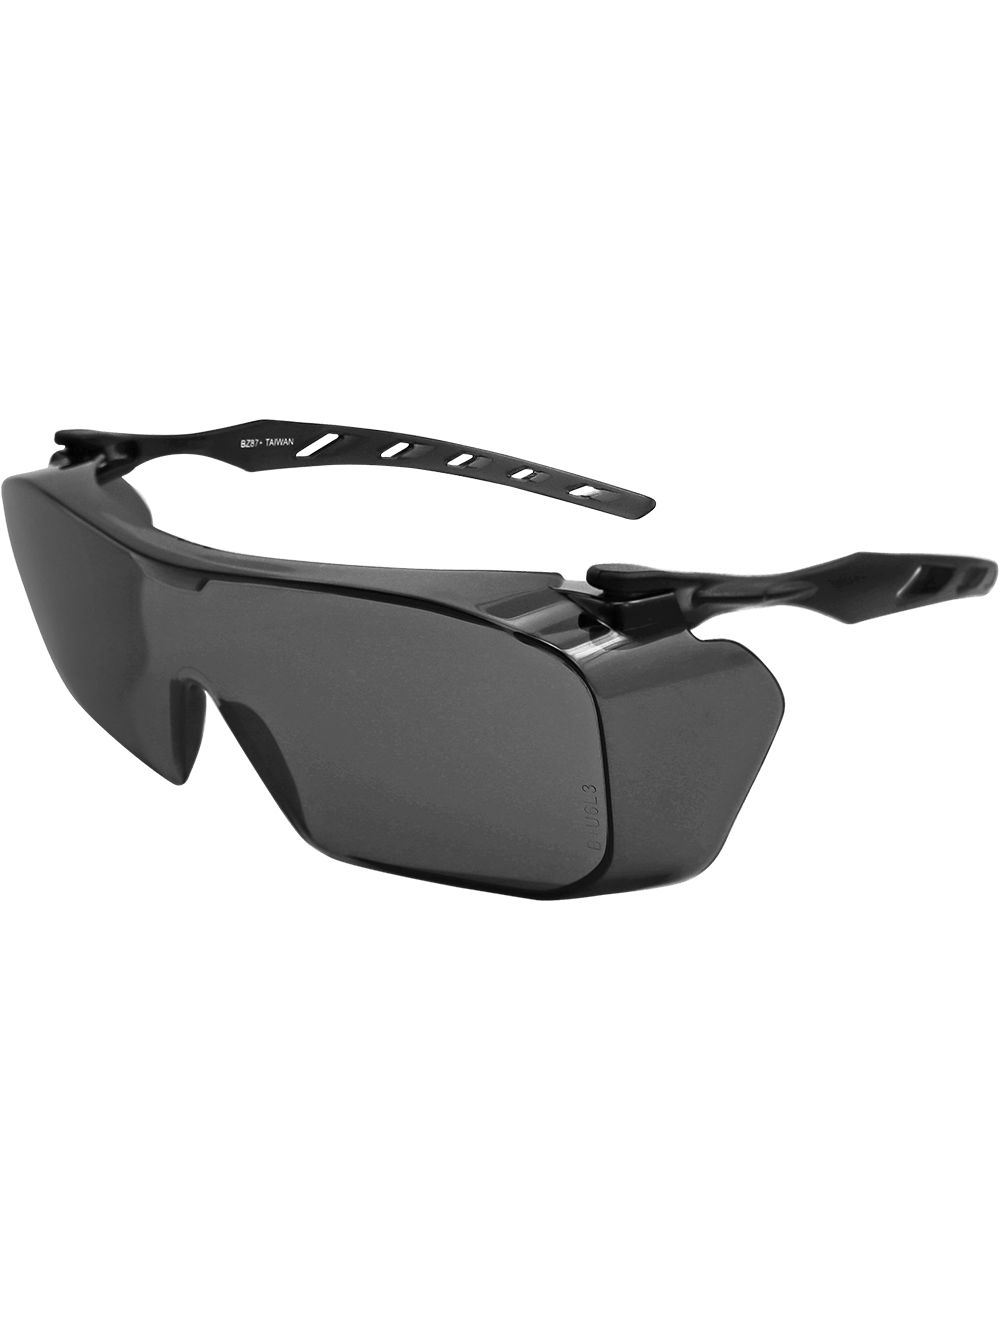 Over-The-Glass Smoke Lens, Frosted Gray Frame Visitor Specs Safety Glasses - BH3133